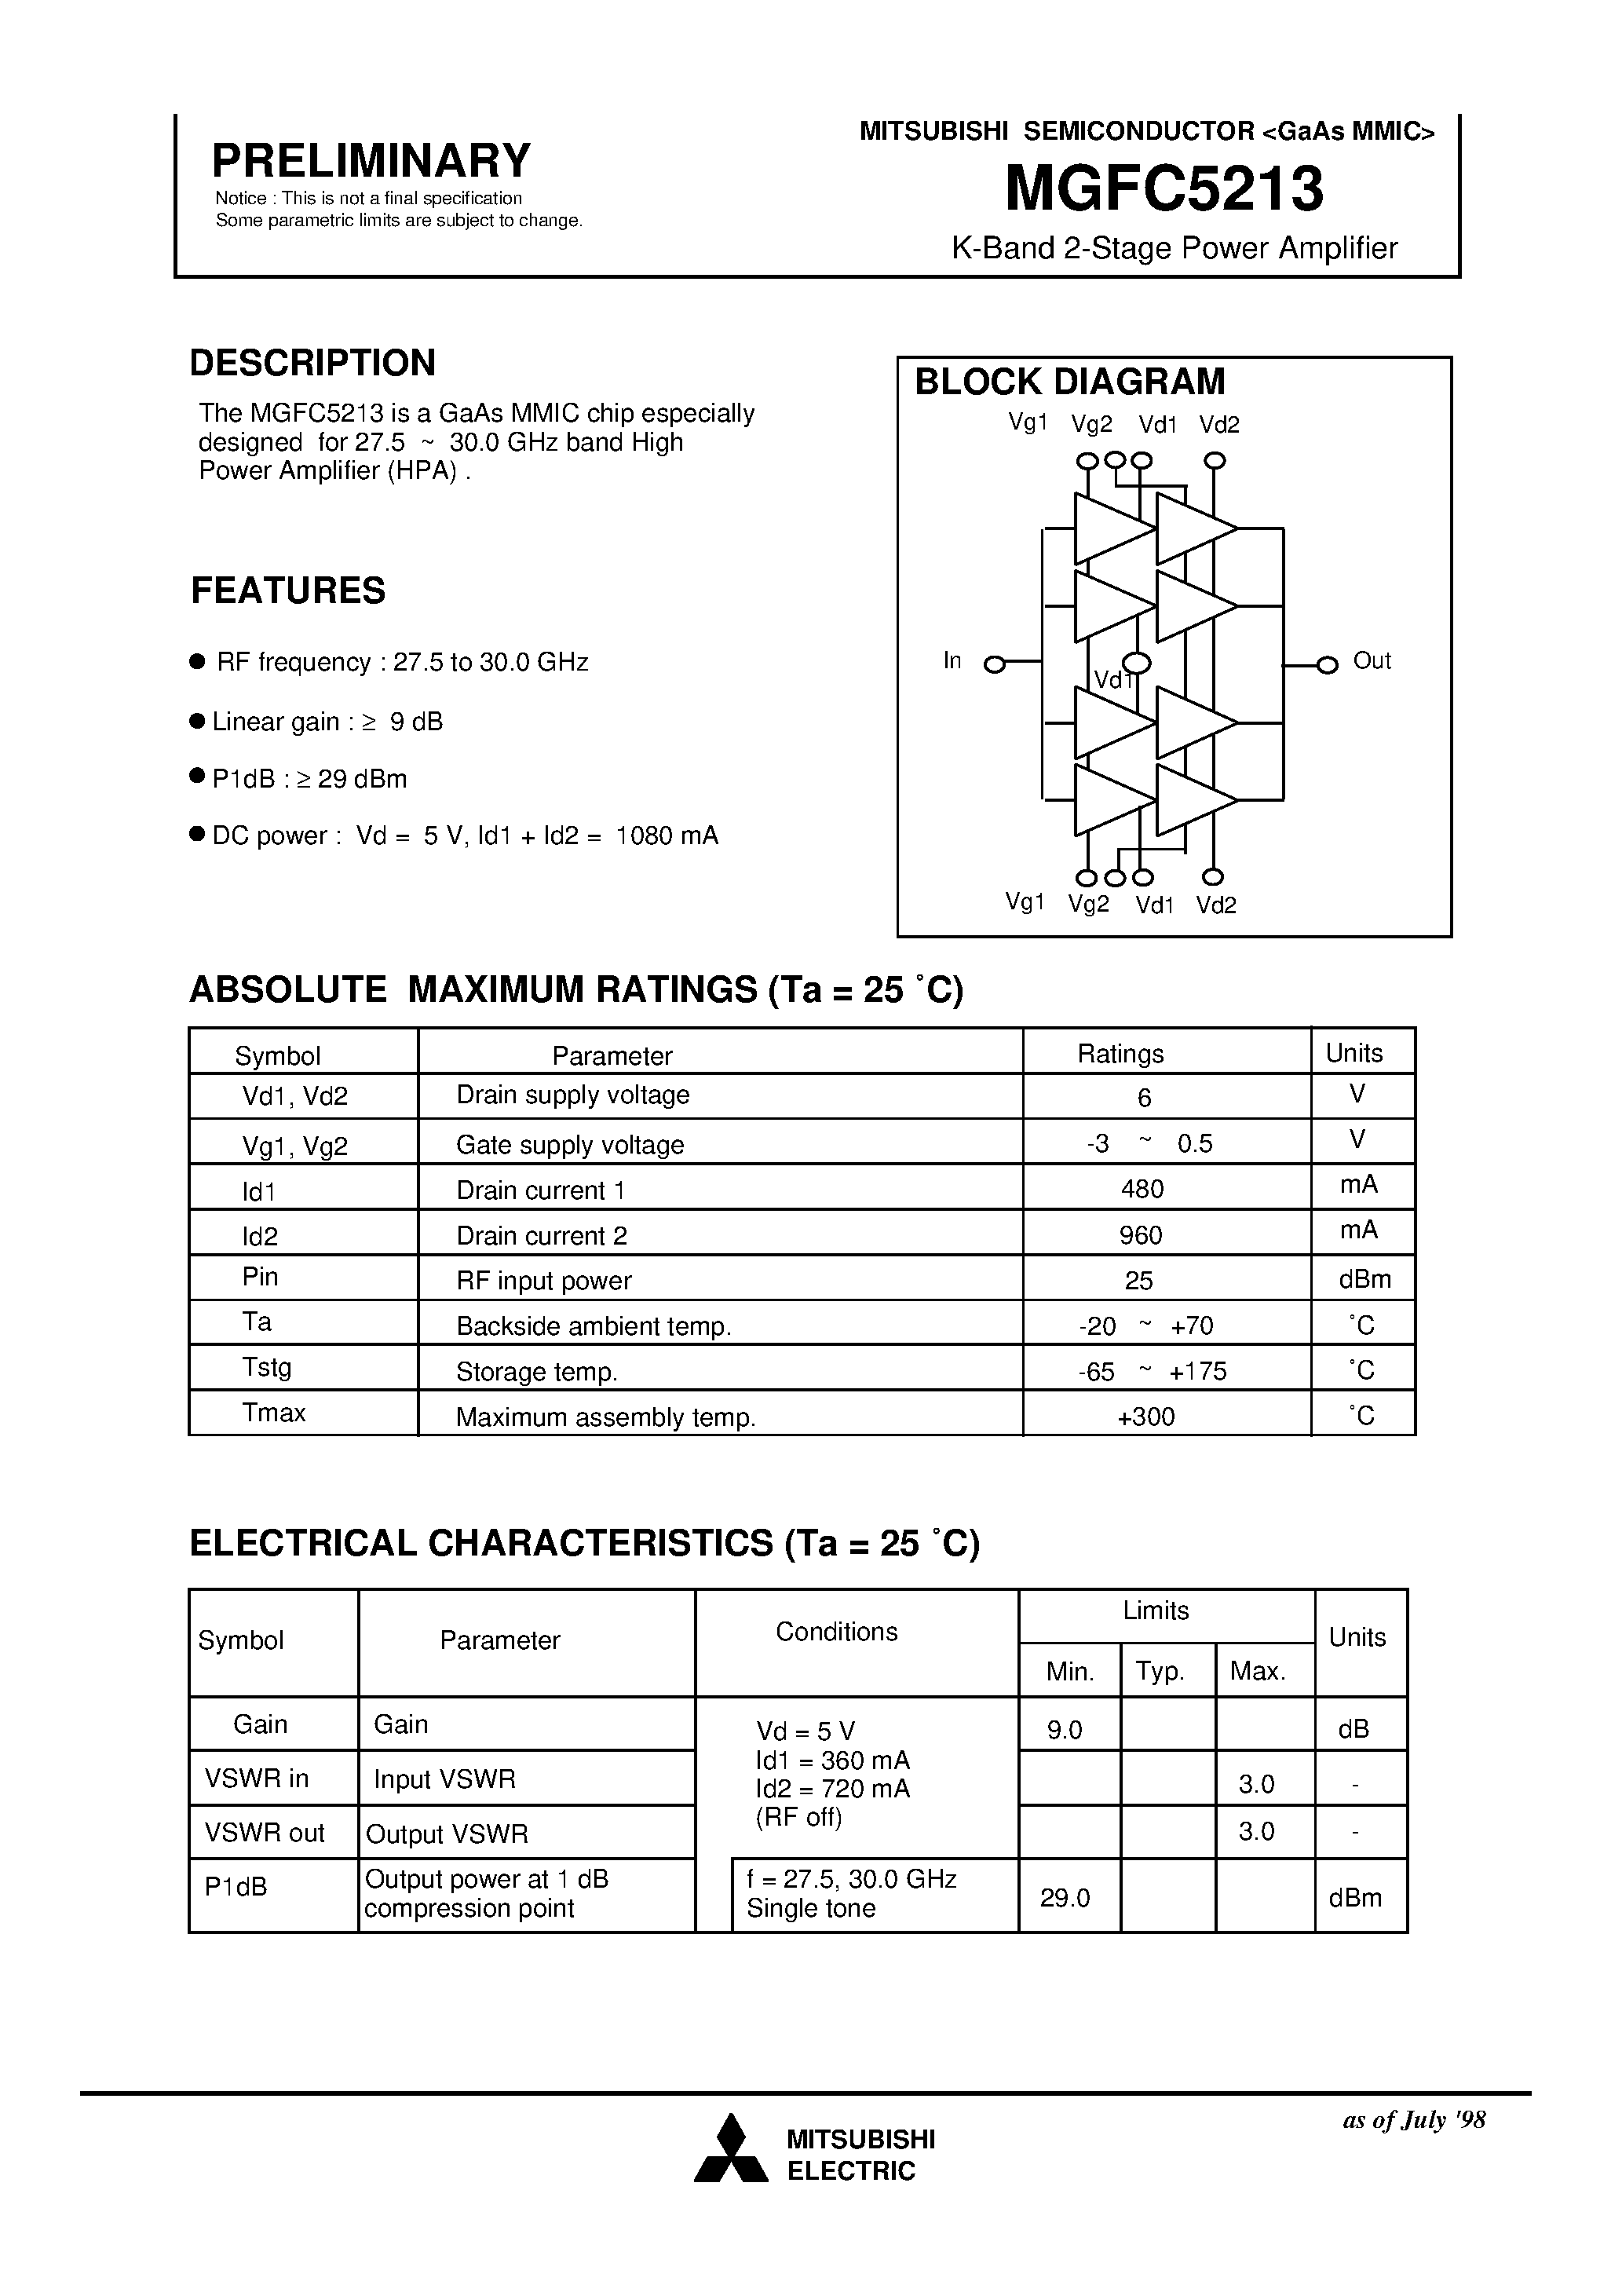 Datasheet MGFC5213 - K-Band 2-Stage Power Amplifier page 1